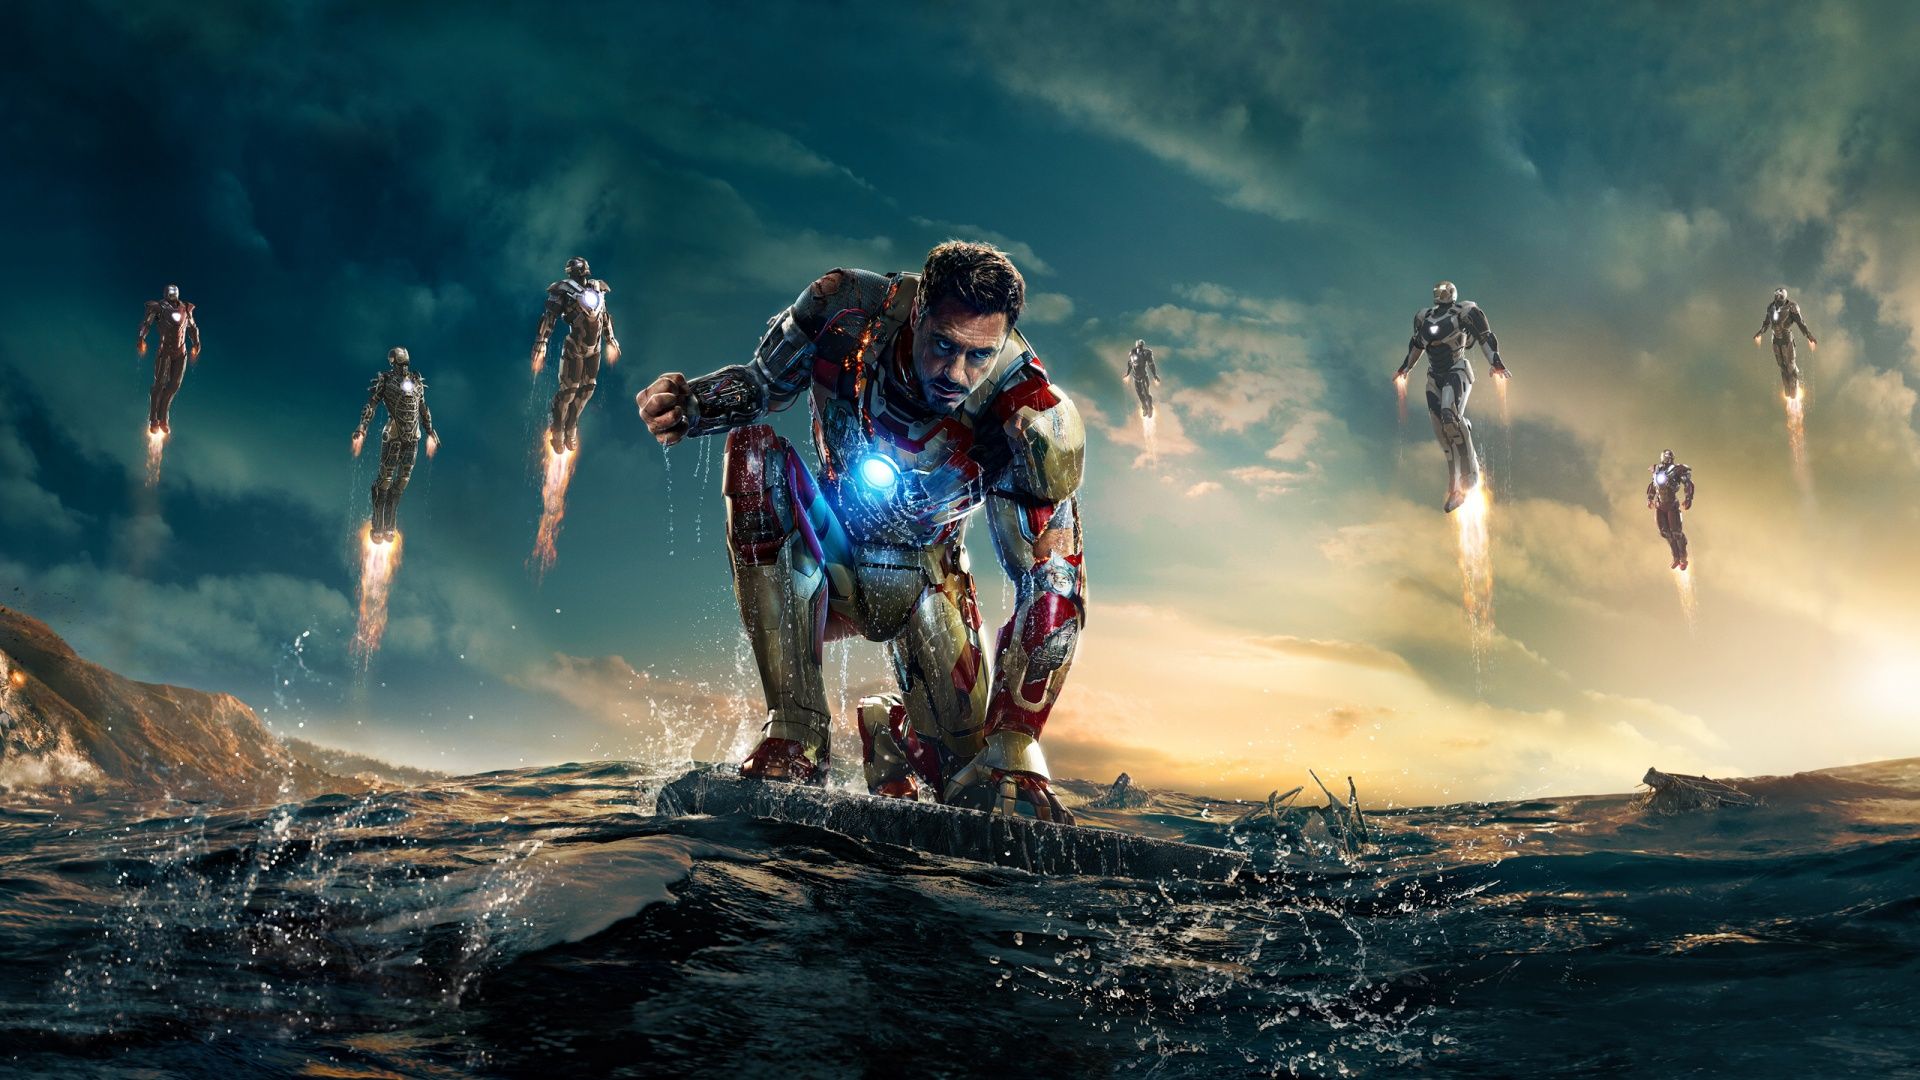 Top 10 HD Iron Man Wallpapers for iPhone 5/5s